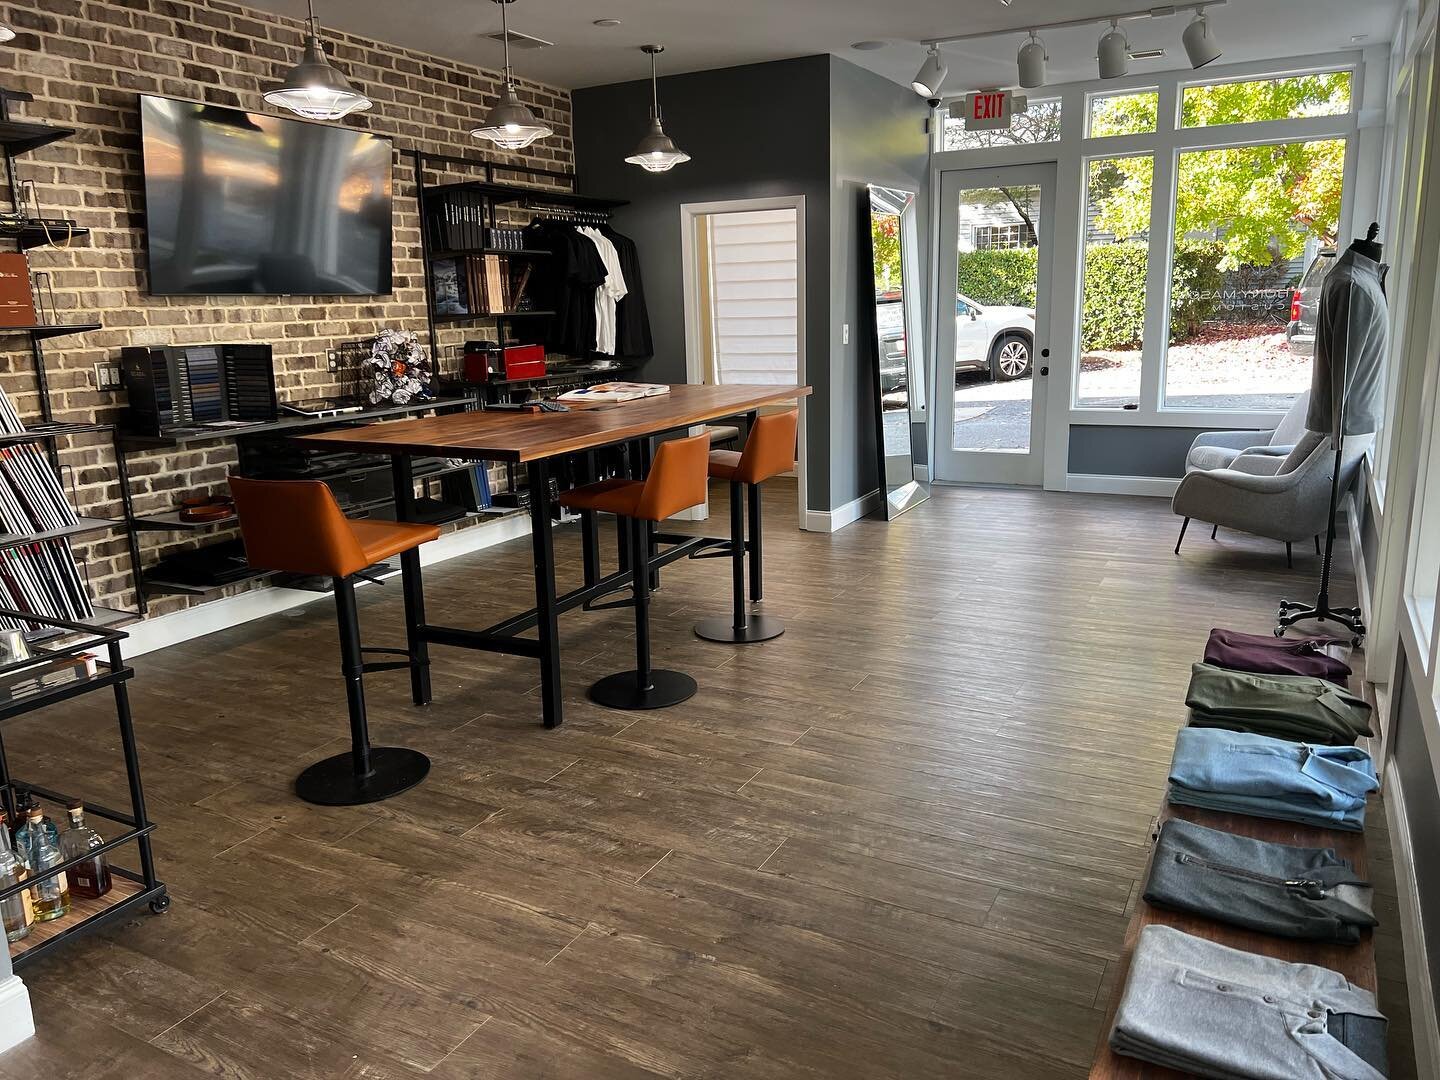 New season, new fabrics , new showroom.

Book your Fall/Winter appointment today at our new showroom in Historic Roswell, and experience the luxury of clothing made exclusively for you. 

We pride ourselves on providing the best customer service in t